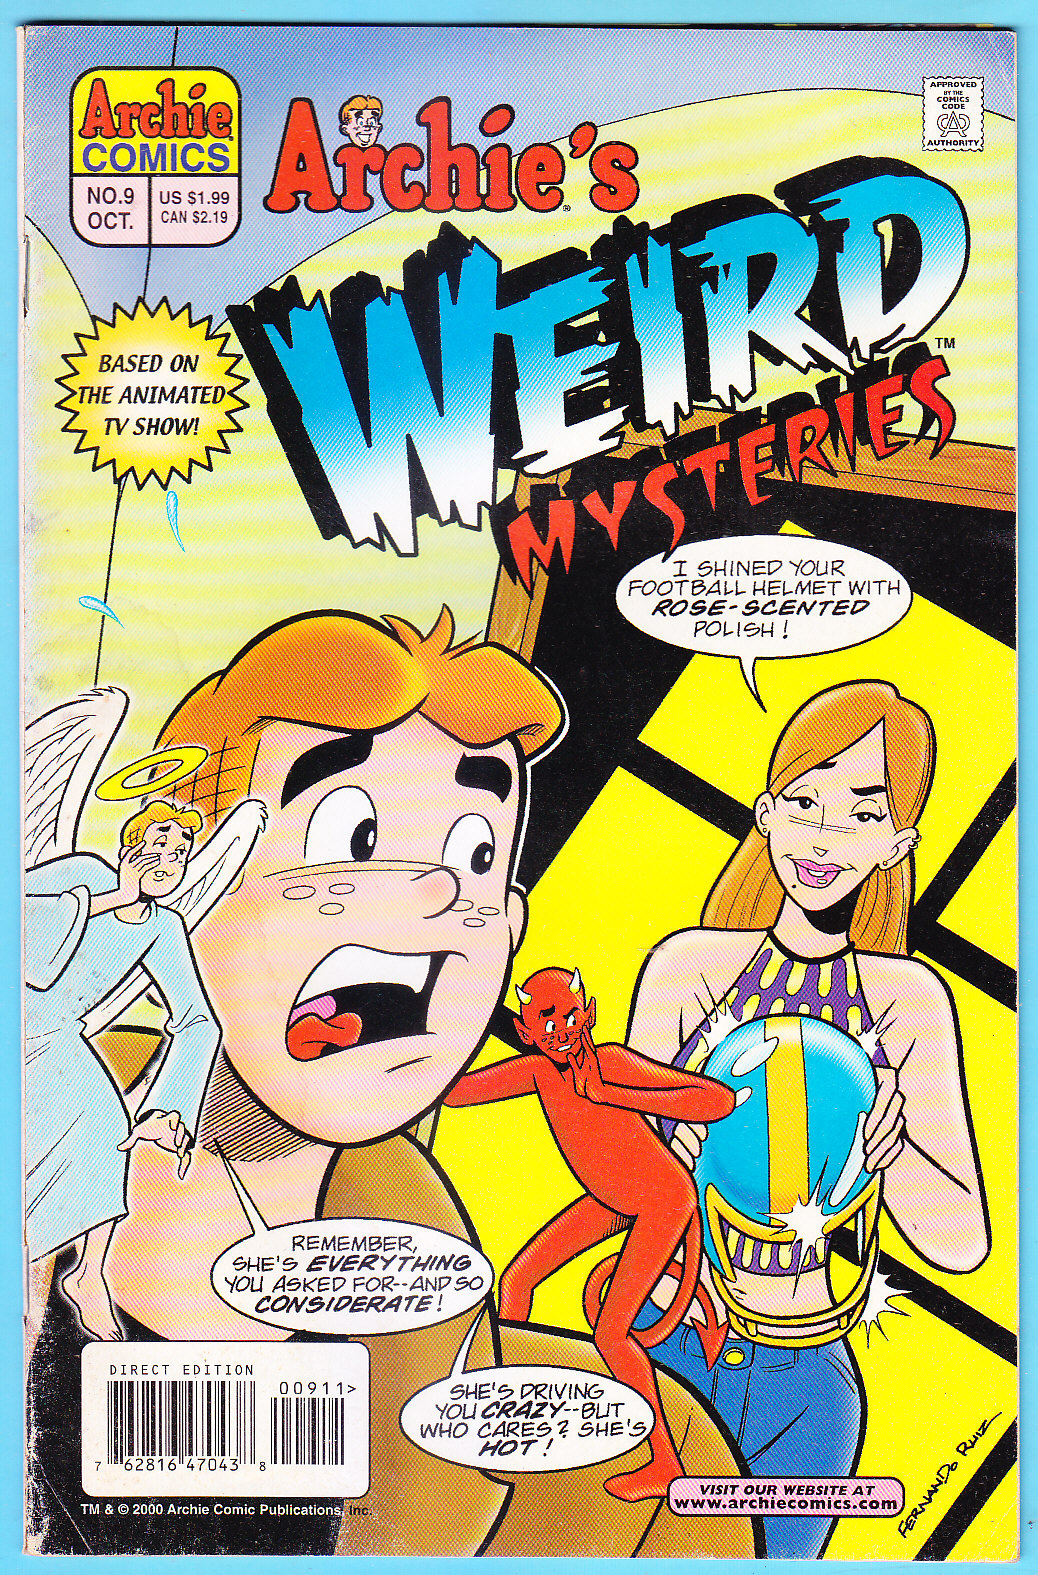 ARCHIE COMIC - # 9 - WEIRED MYSTERIES - AS PER SCAN - B1